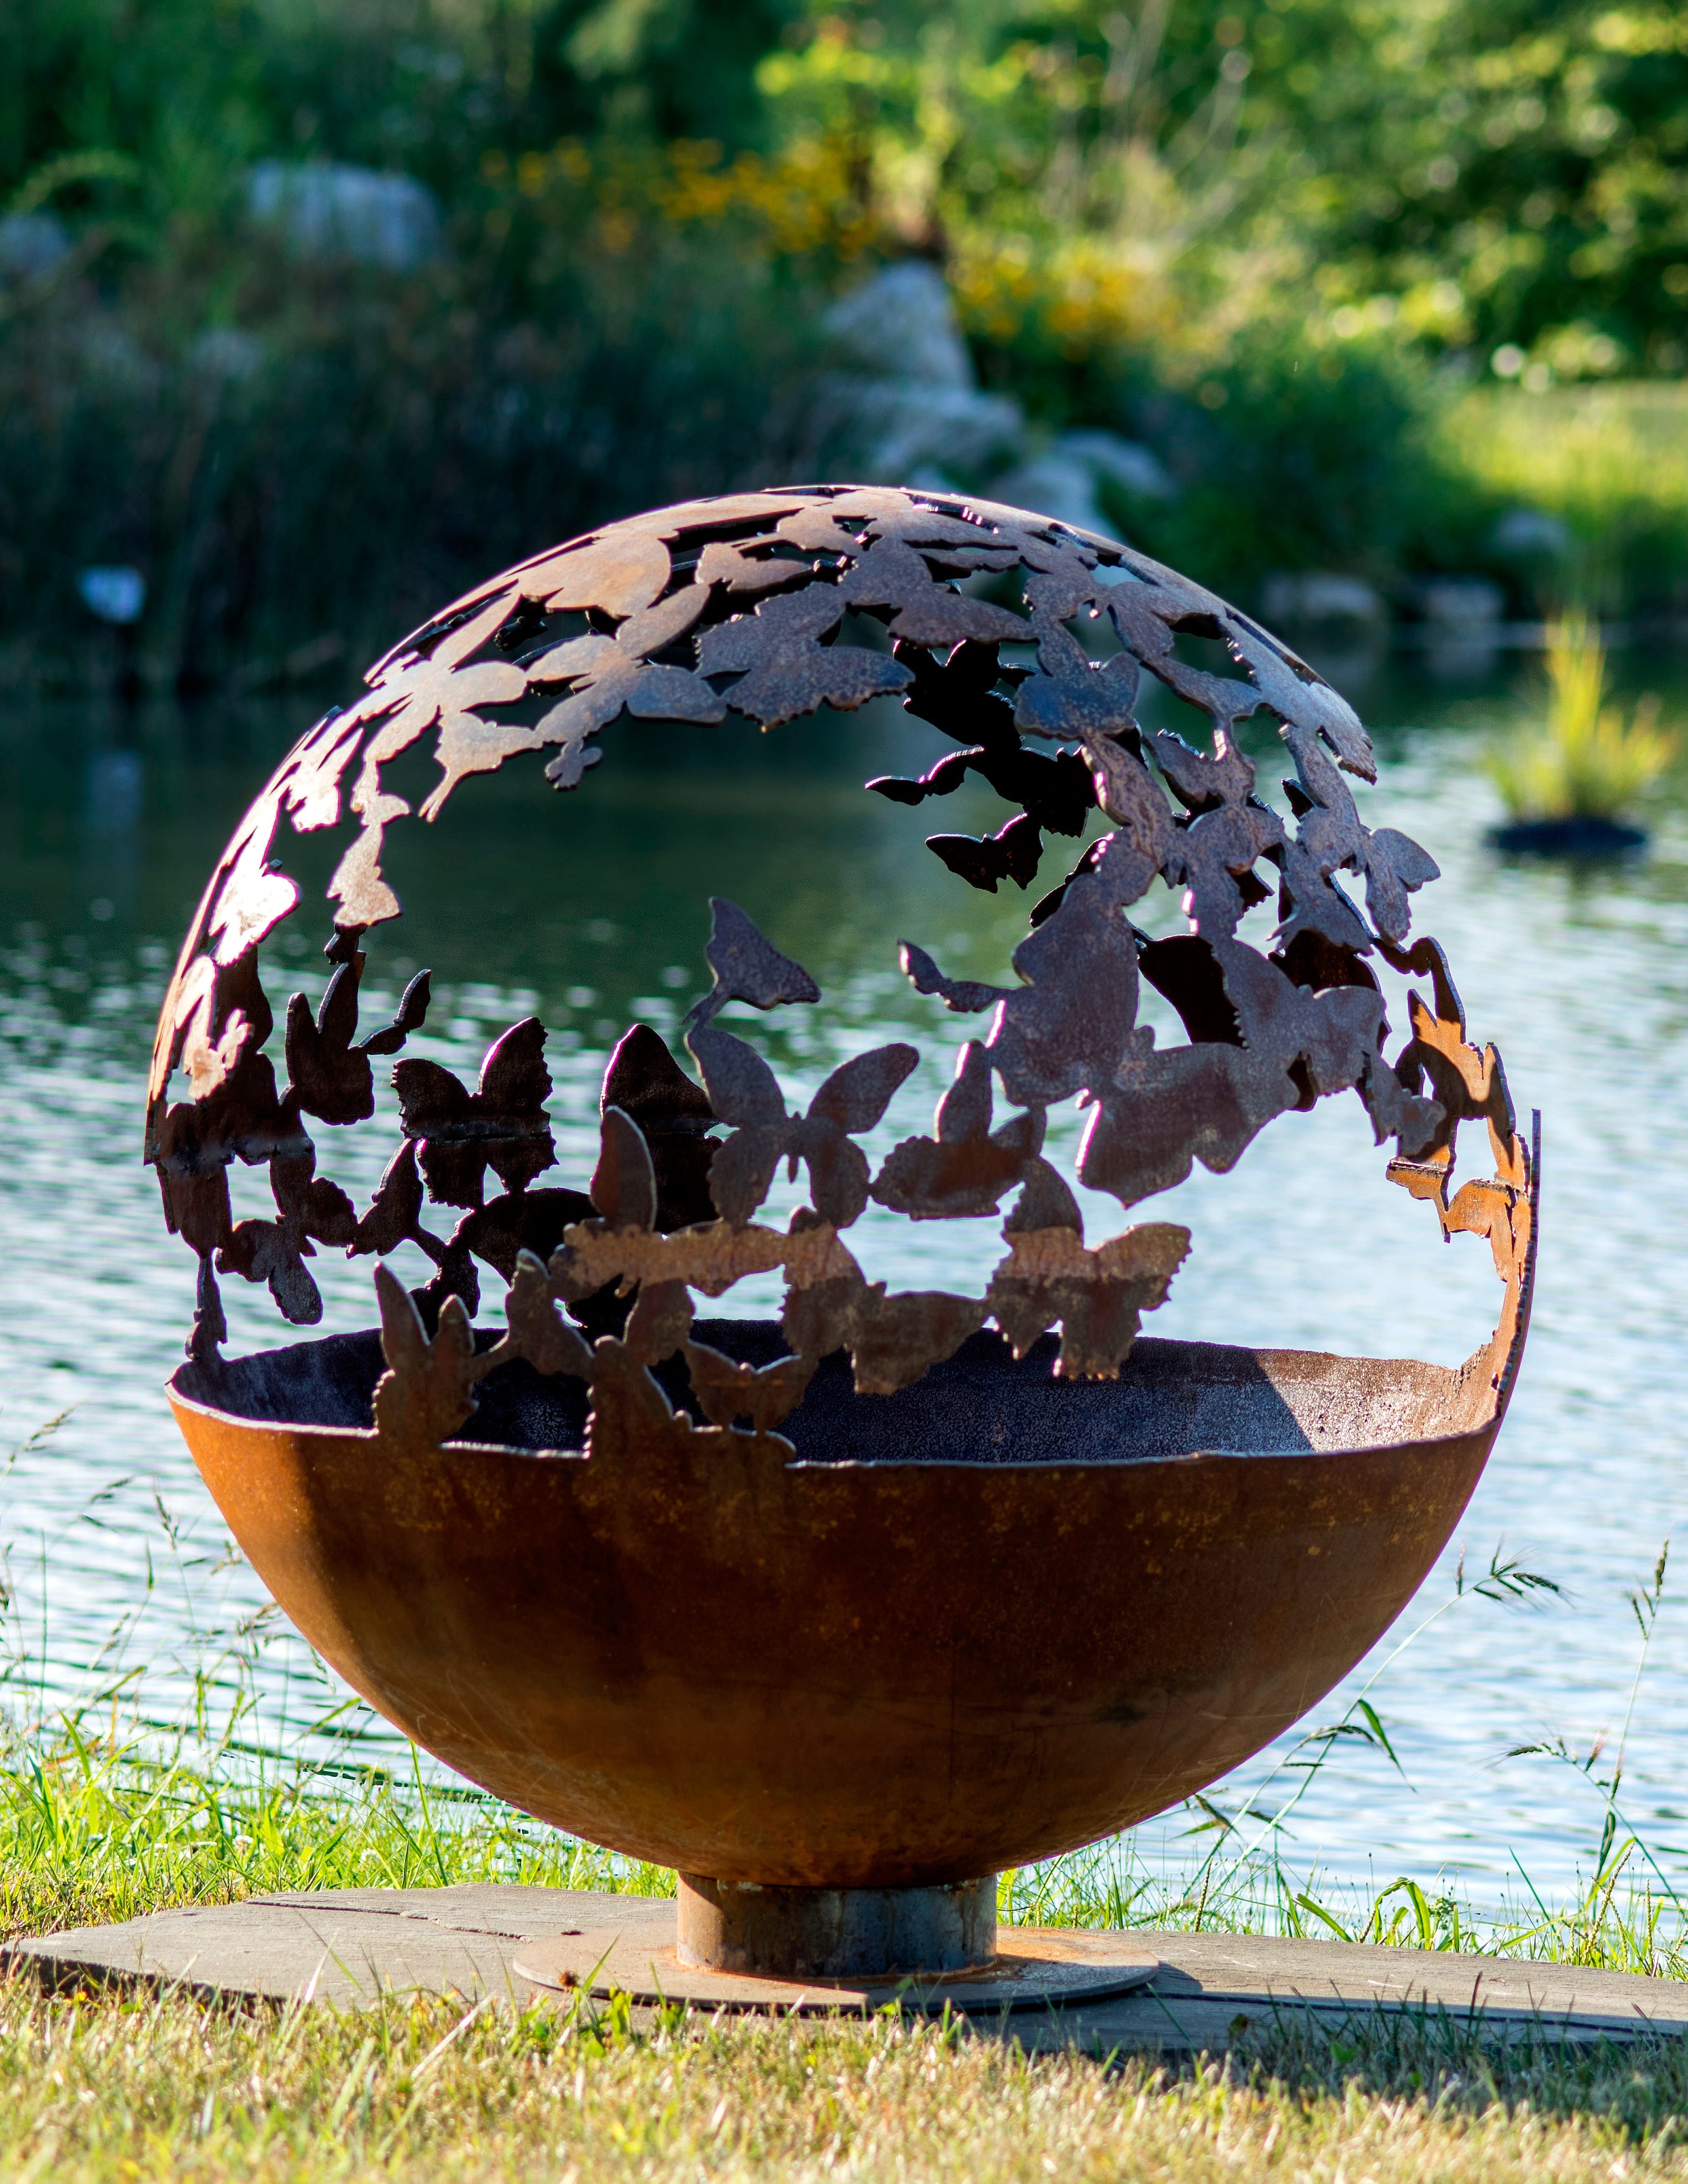 The Fire Pit Gallery Wings – Butterfly Fire Pit Sphere